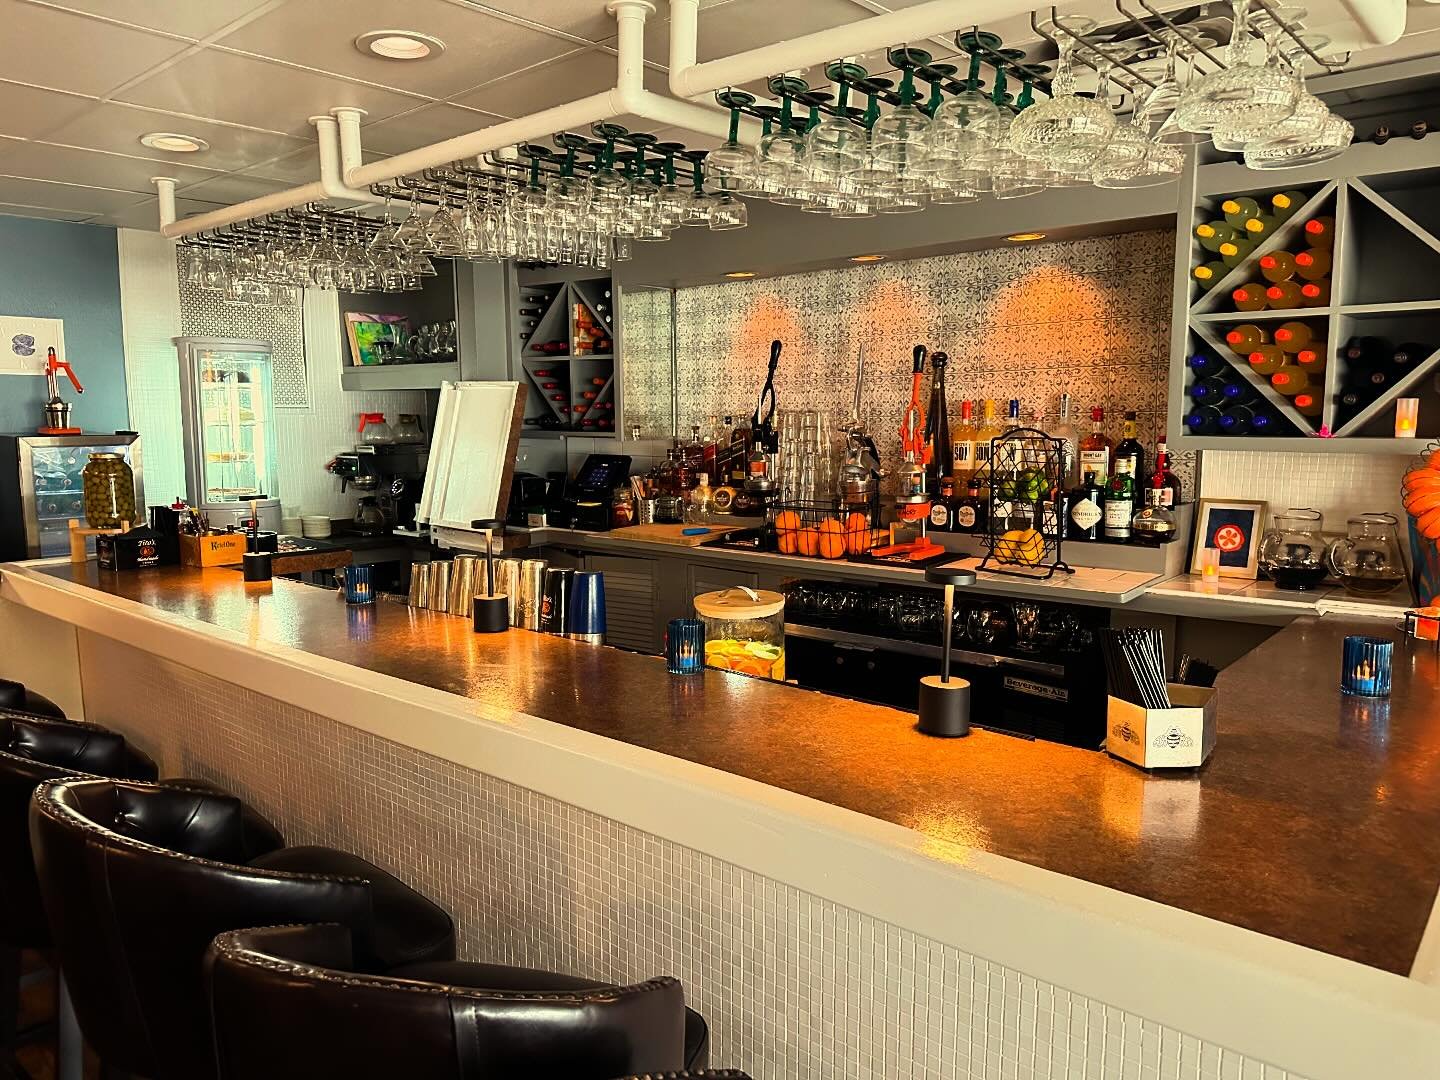 Join us at our cozy bar for fresh made sangria, orange, lemon and lime crushes. Try one of our silk smooth margaritas, signature cosmos or classic cocktails. Our cold beer, red wine and white wine selections are the perfect pairing for nights like to